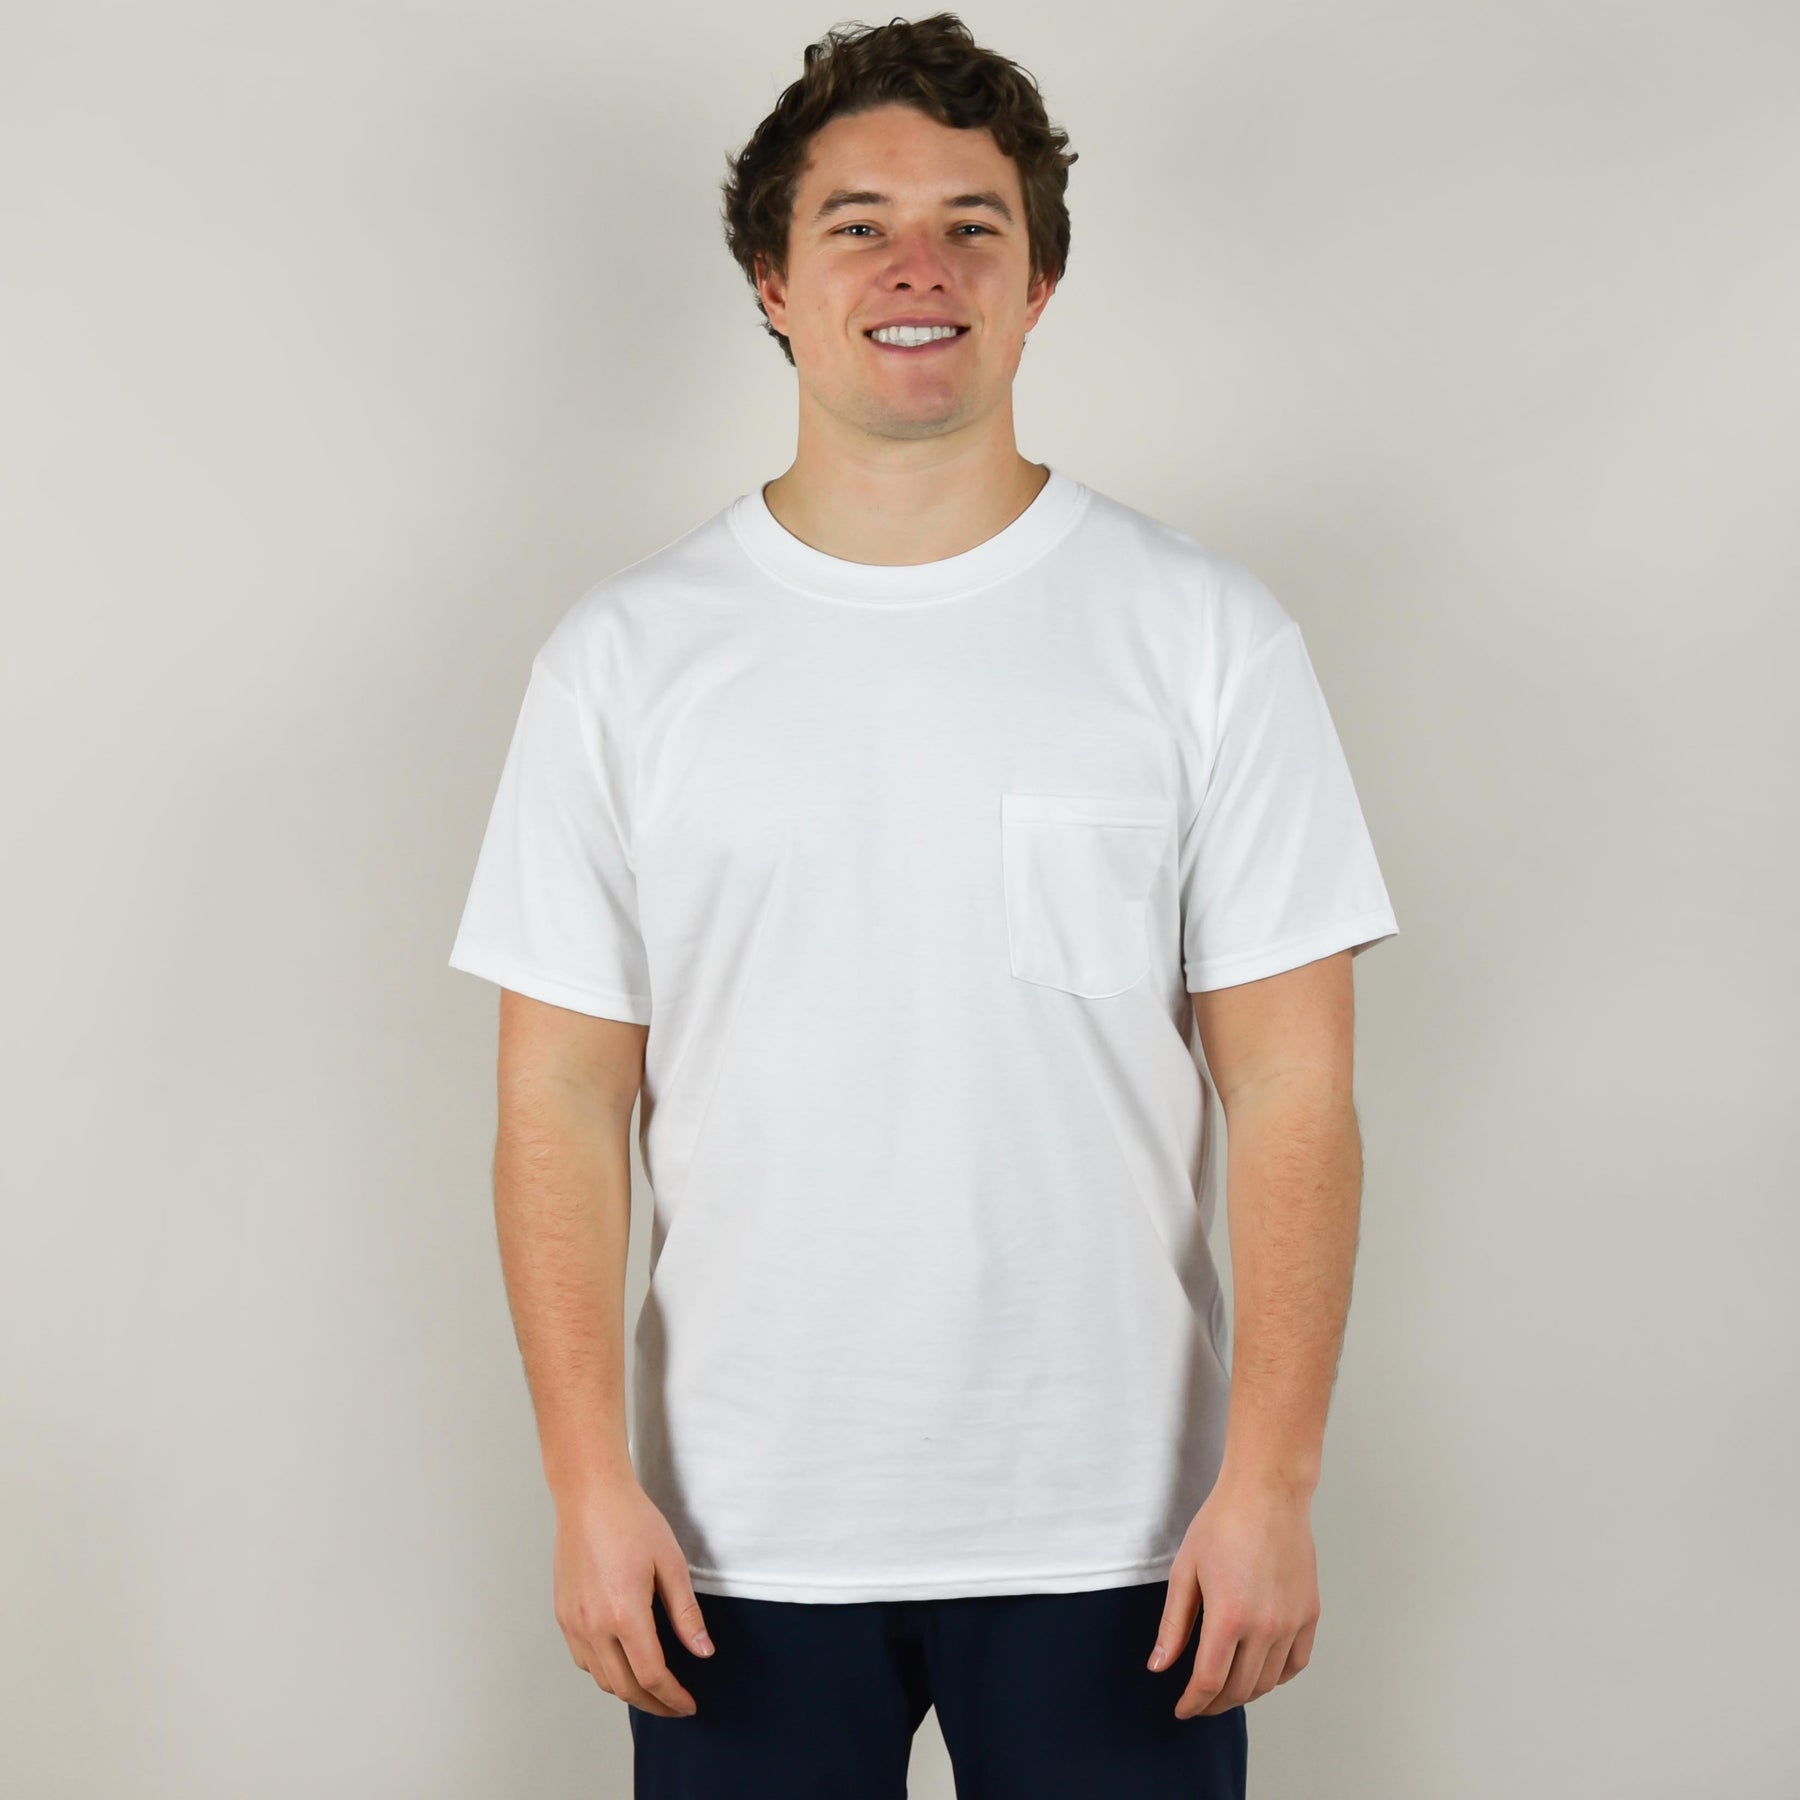 Model wearing Hanes 5190P Beefy Tee with Pocket